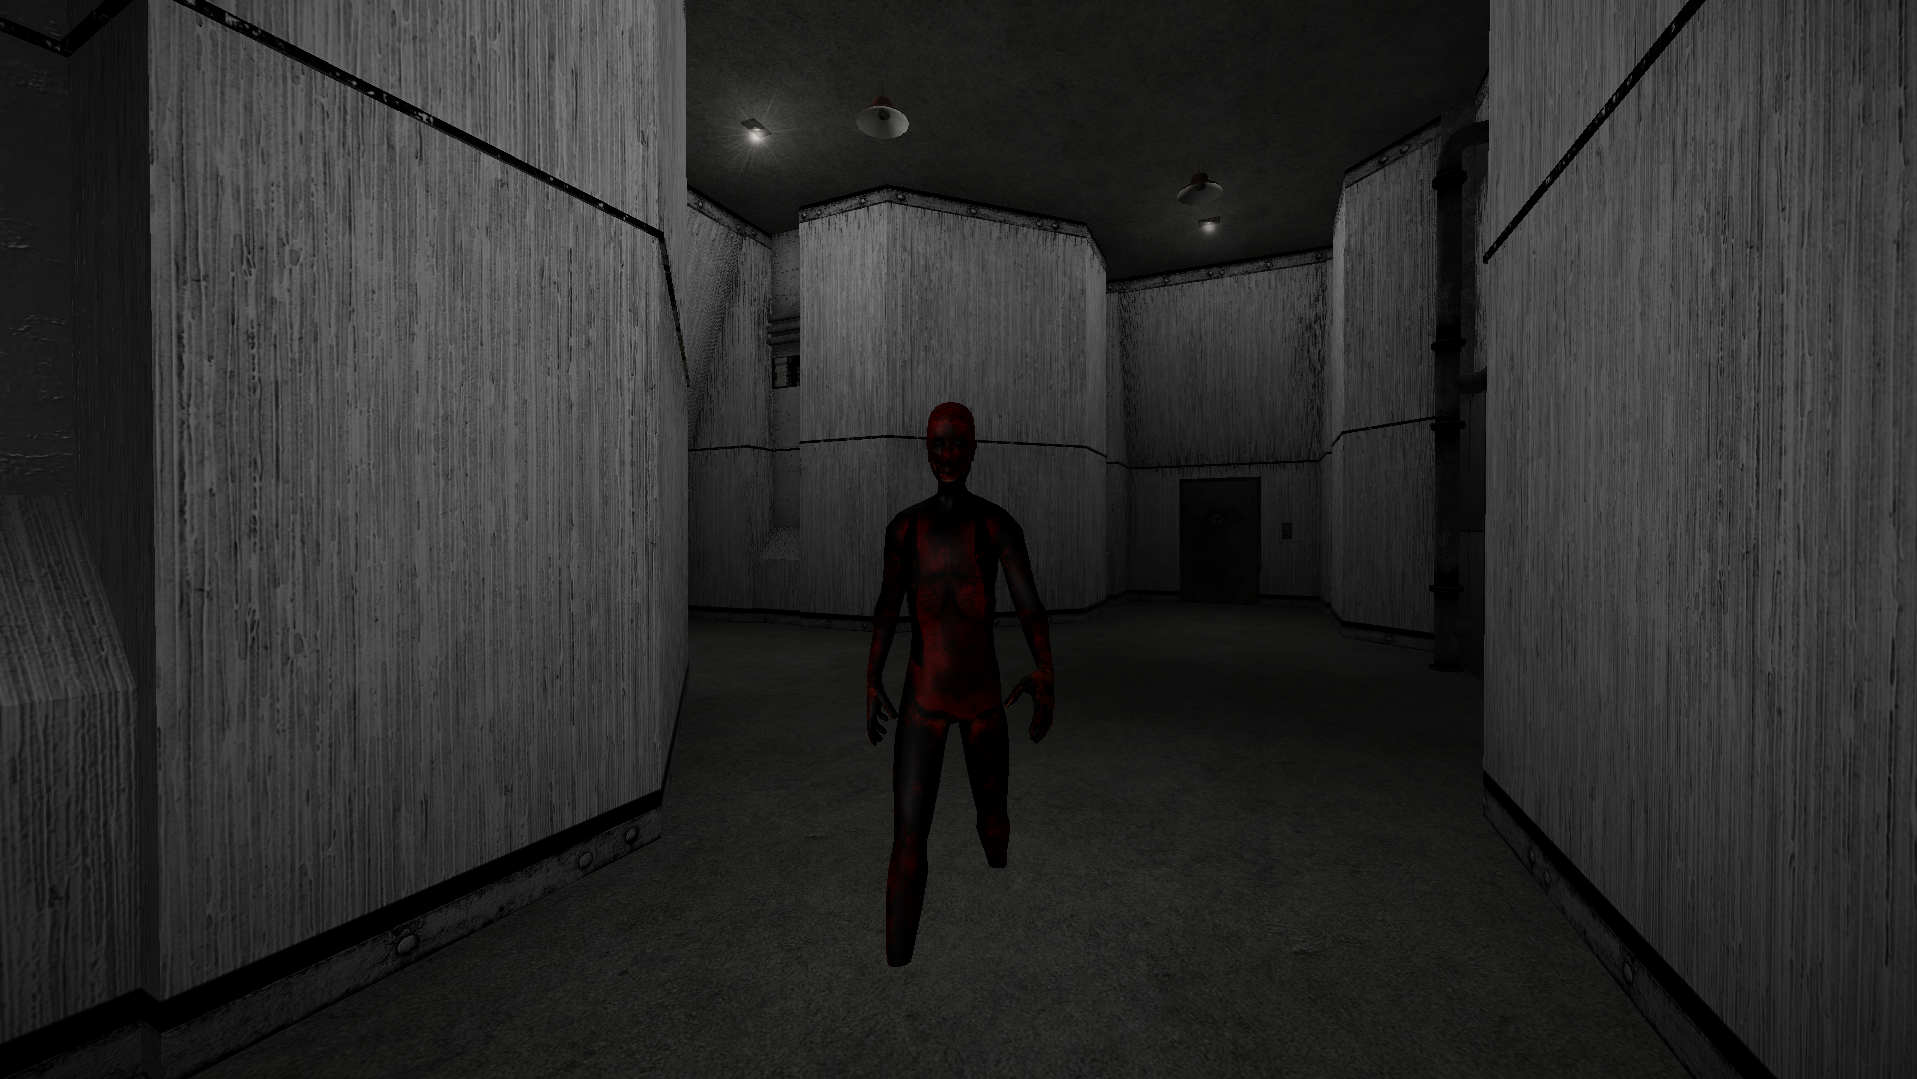 free download scp video game